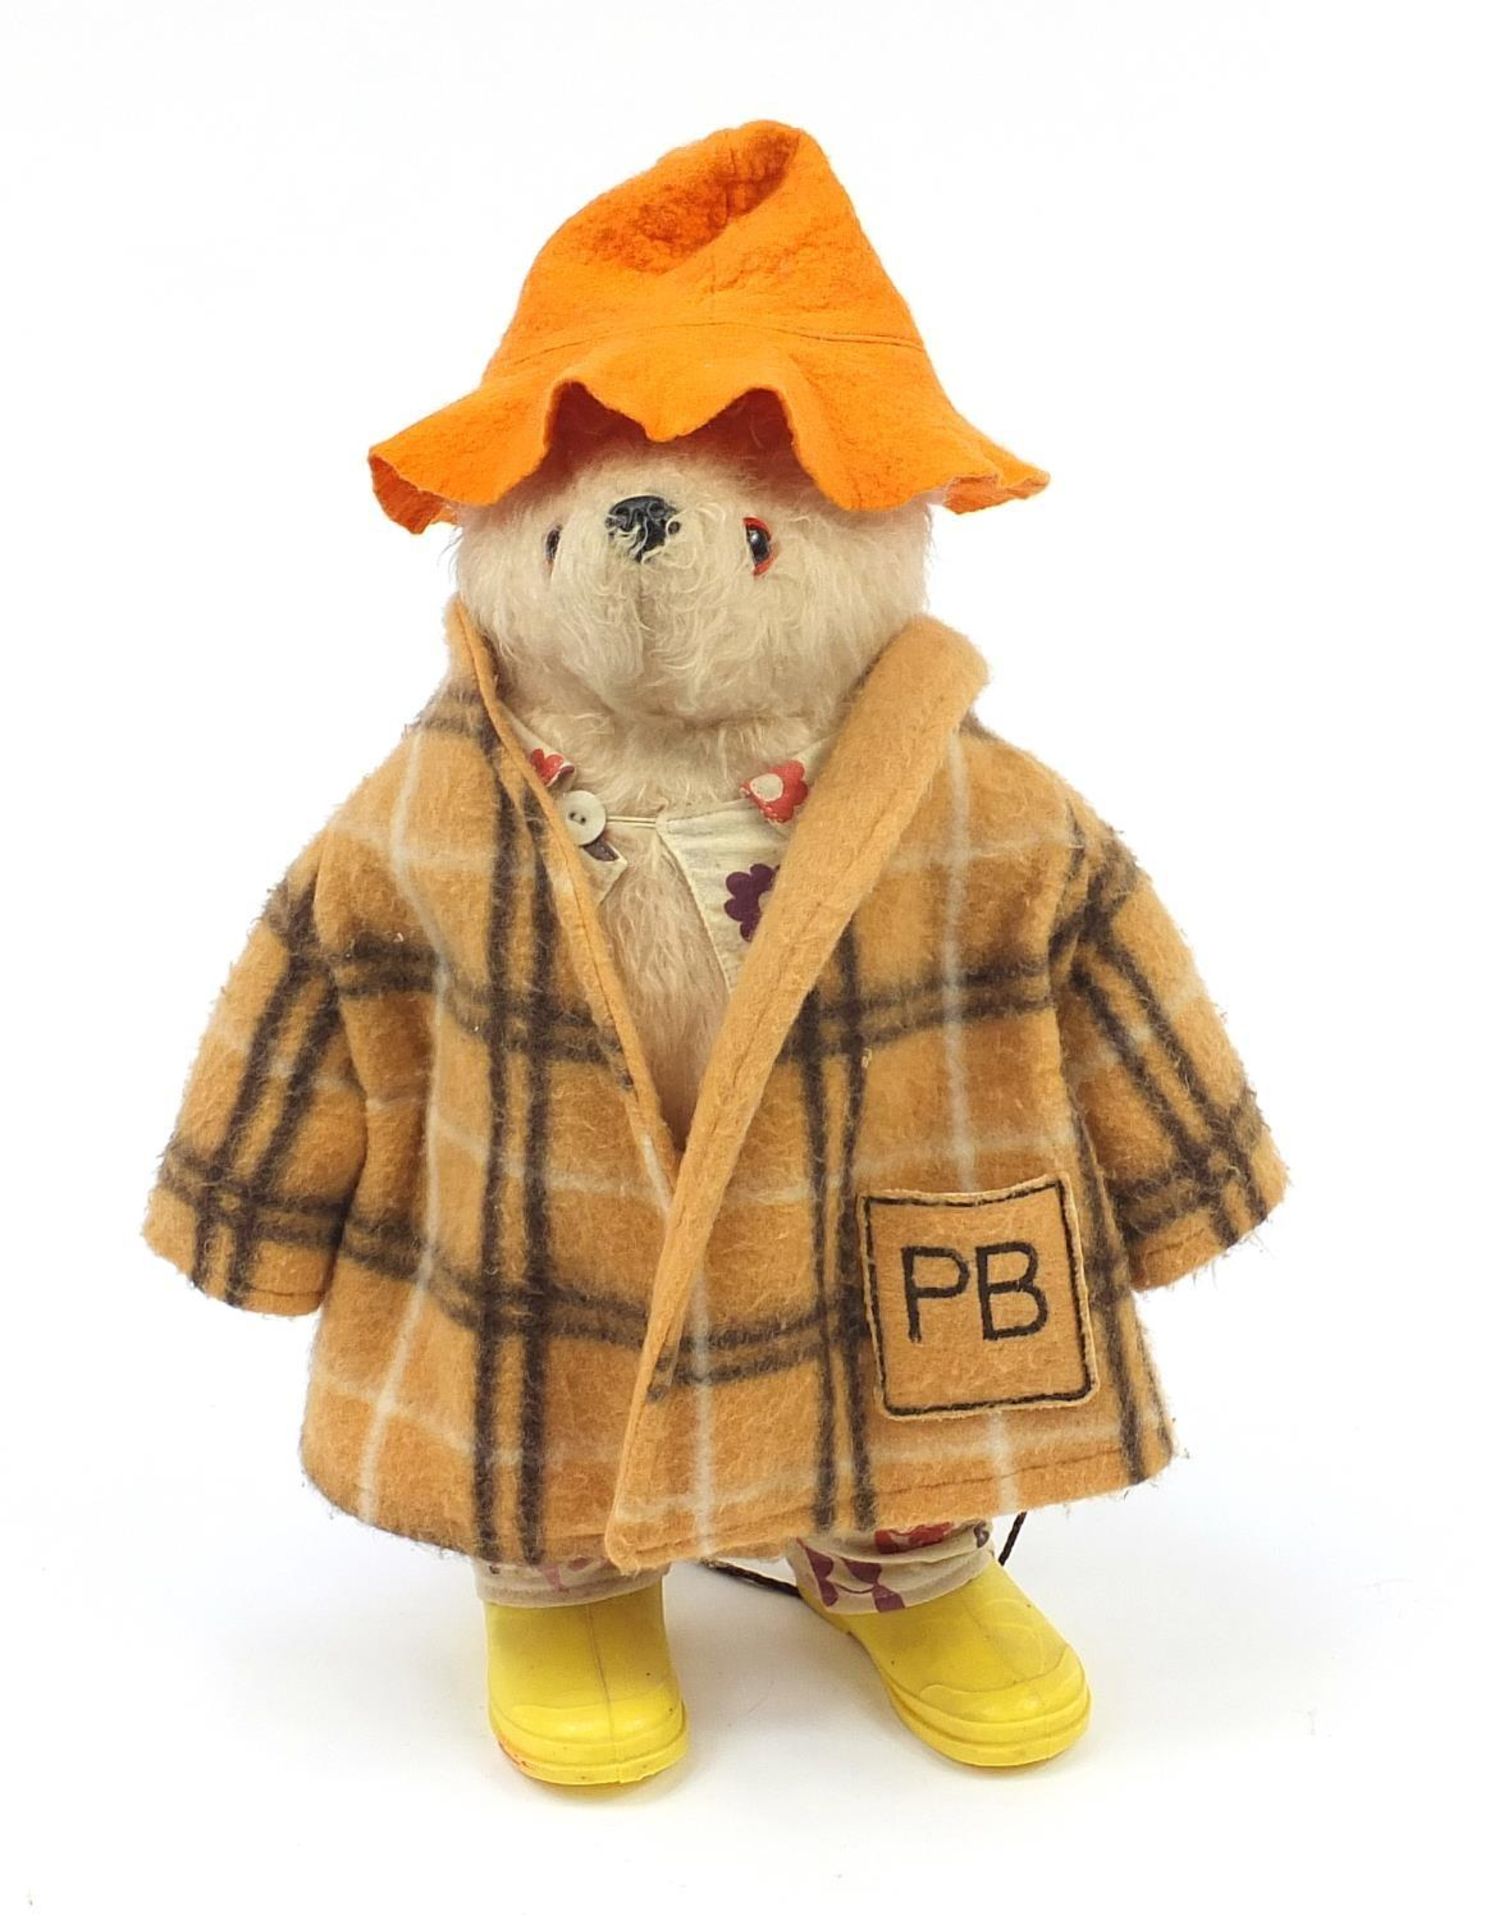 Vintage Gabrielle Design Paddington bear with yellow Wellington boots with spare clothing, 51cm high - Image 3 of 5